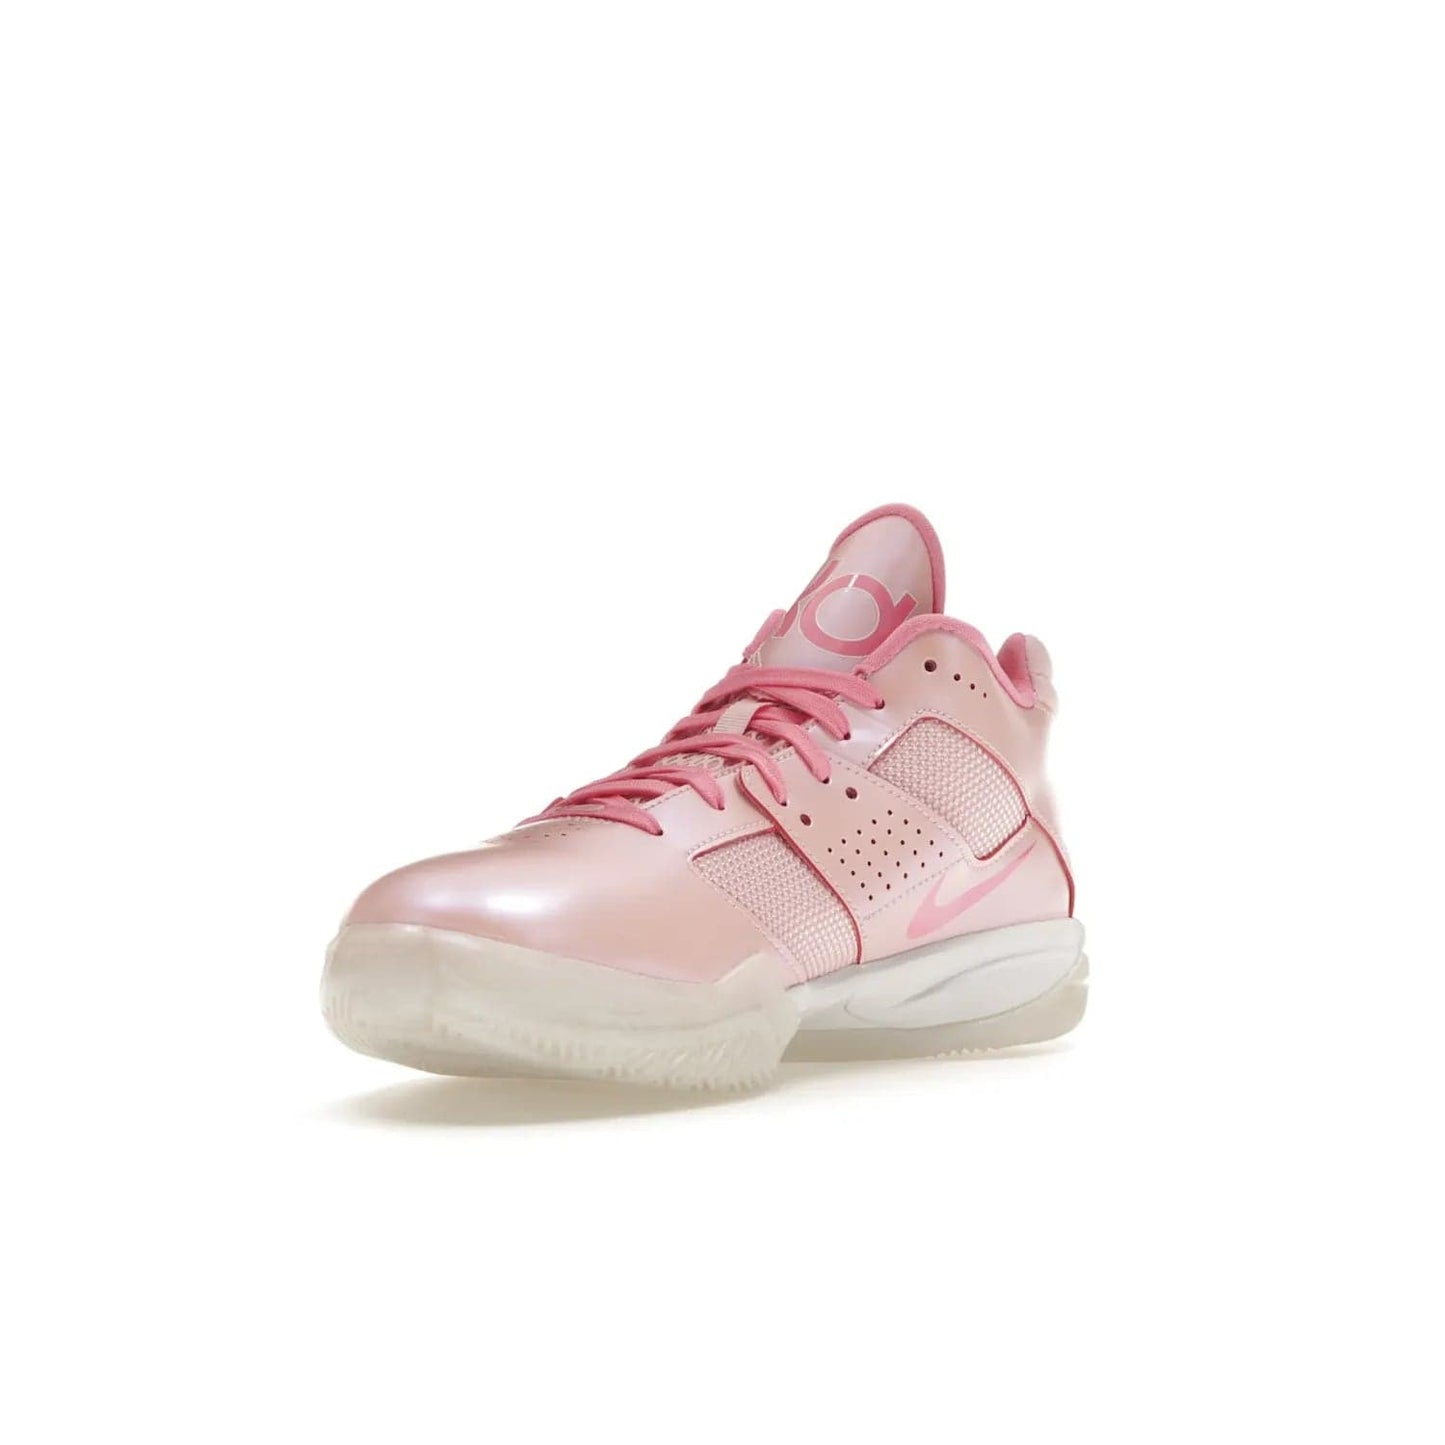 Nike KD 3 Aunt Pearl - Image 14 - Only at www.BallersClubKickz.com - Introducing the Nike KD 3 Aunt Pearl. Featuring a bold Medium Soft Pink, White, & Lotus Pink colorway. Get ready to stand out this October 15th.